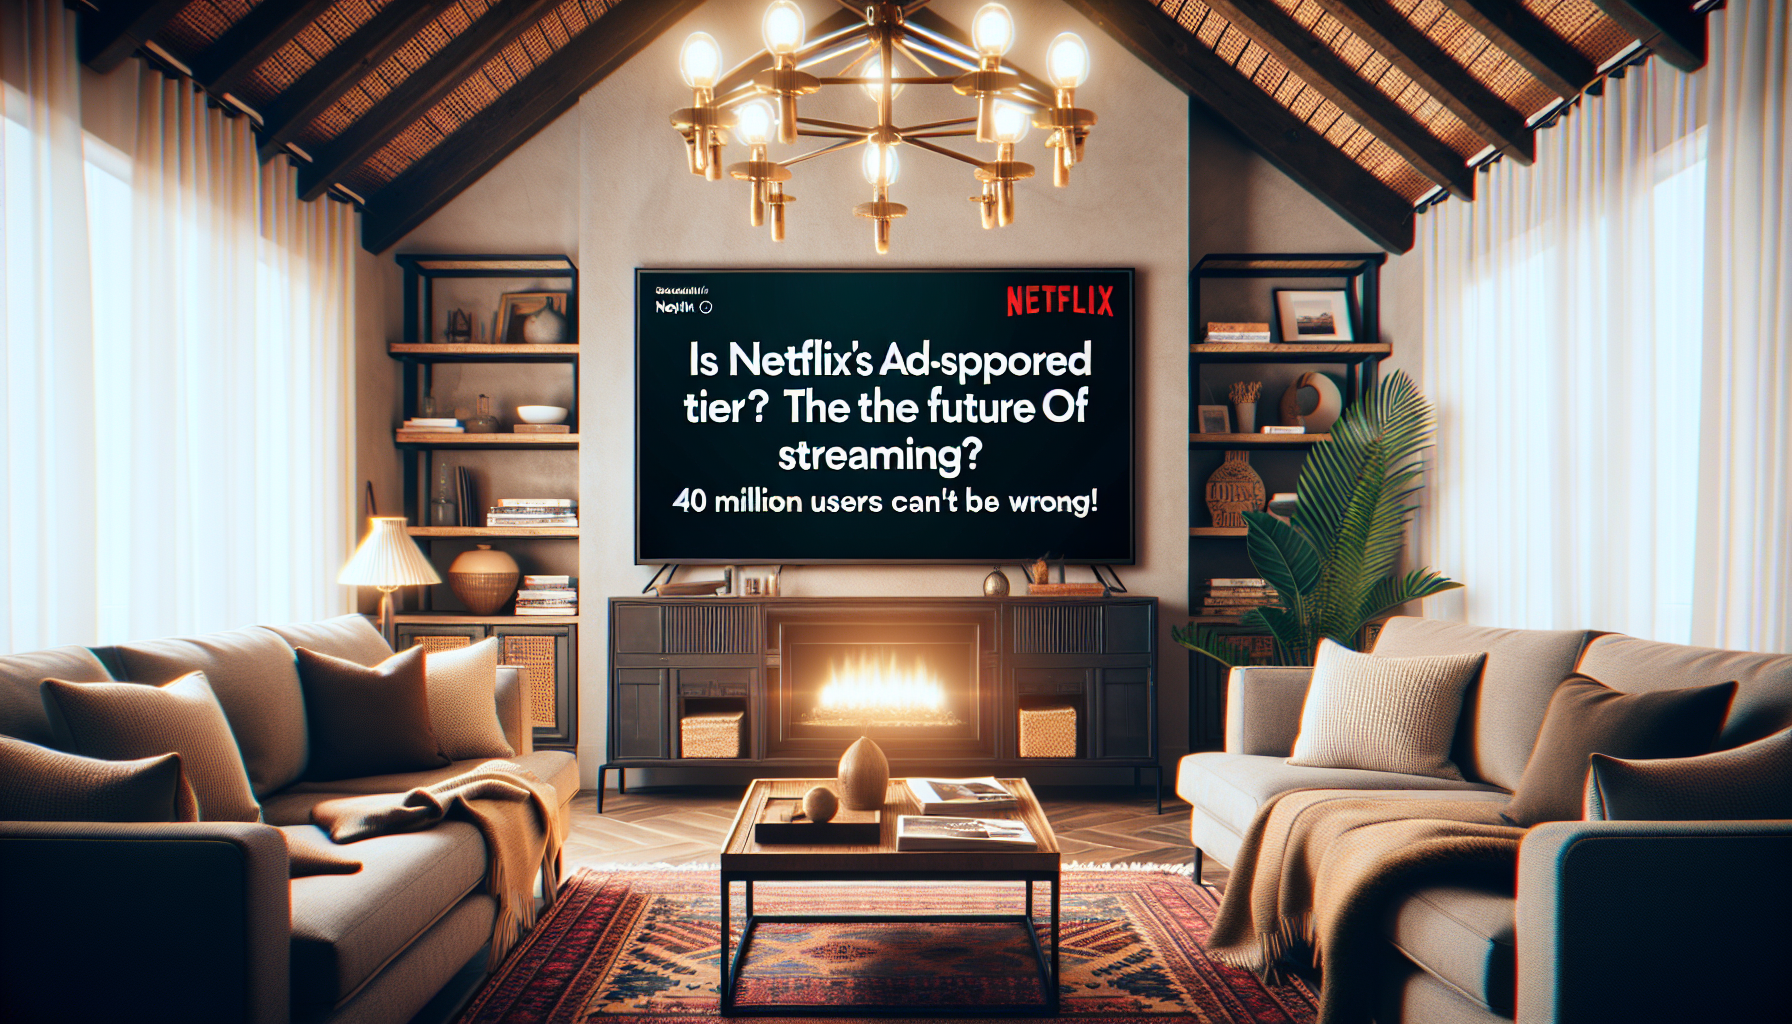 explore the potential of netflix's ad-supported tier as the future of streaming with 40 million users already on board. find out why it's creating buzz in the industry.